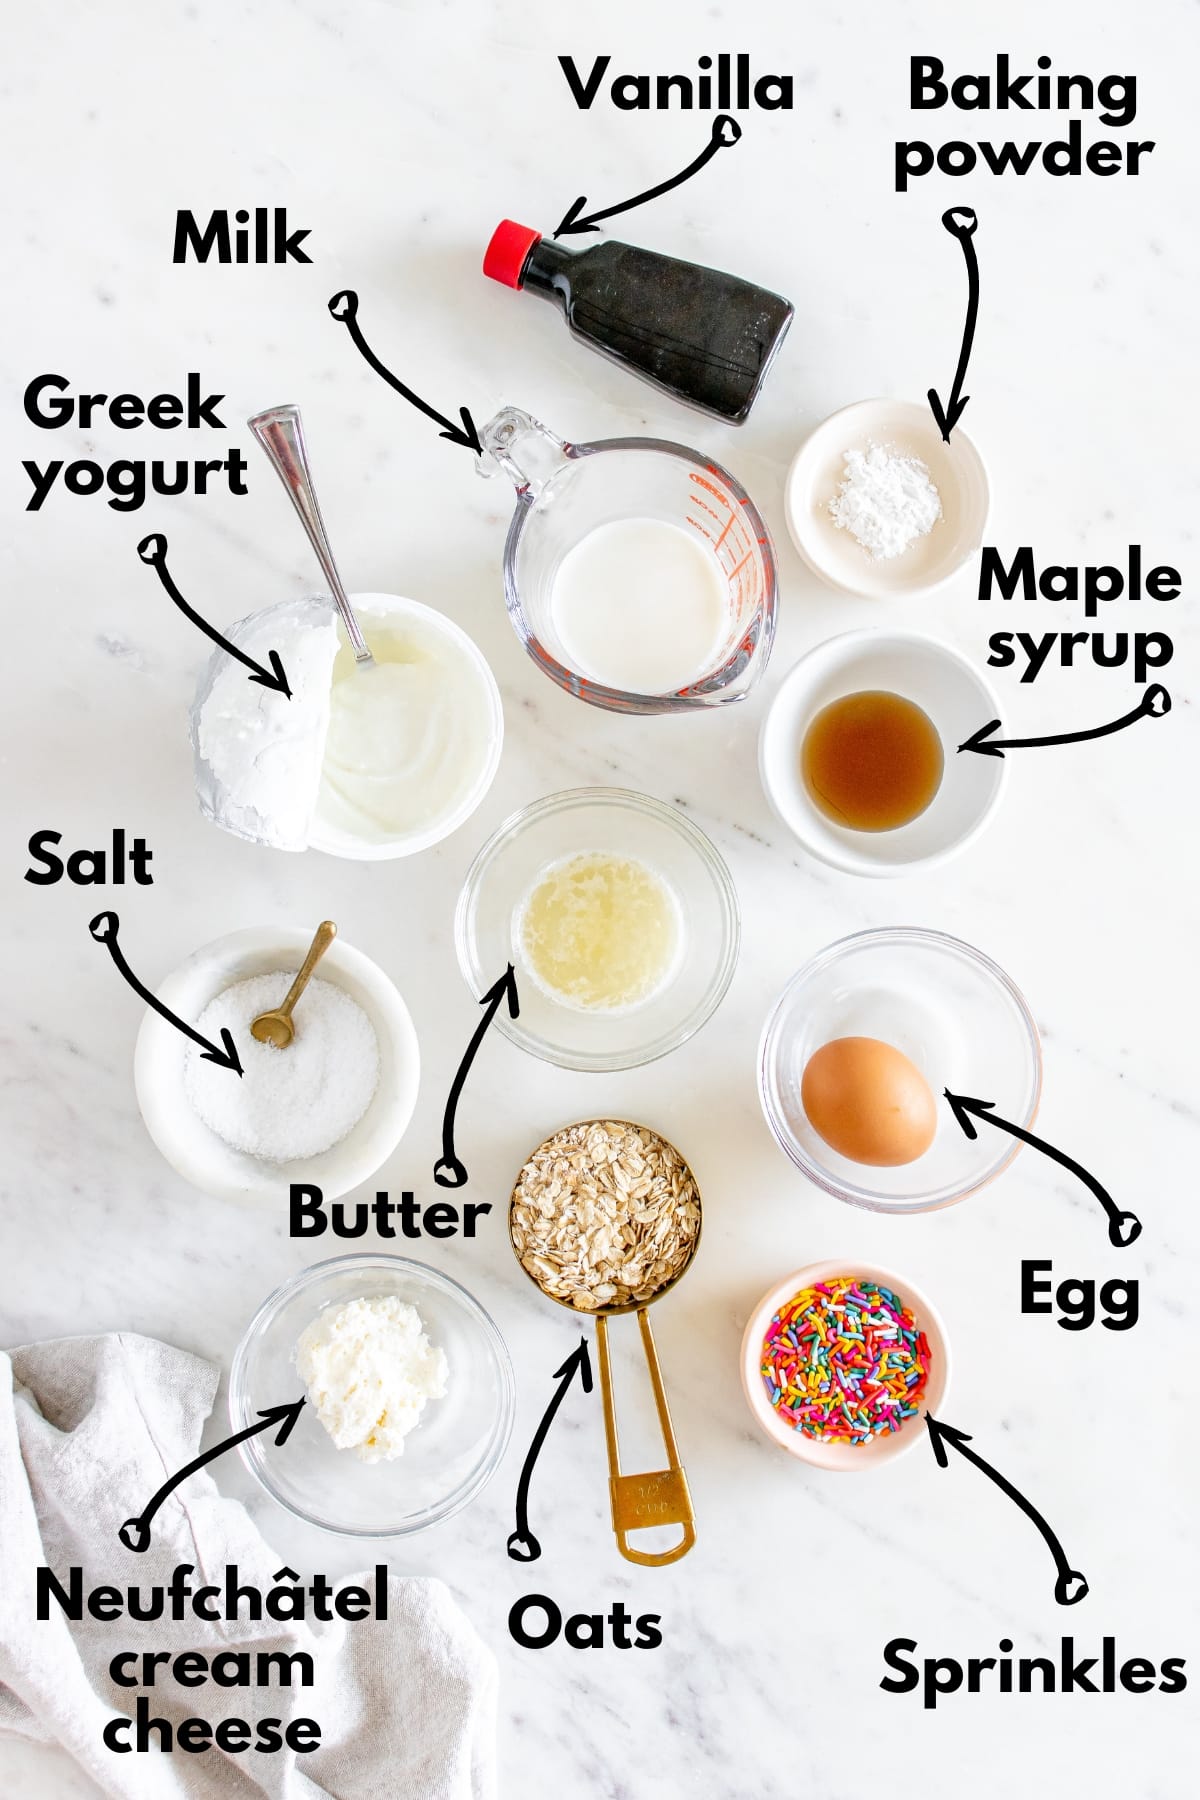 All of the ingredients to make baked oats on a white table next to a napkin.